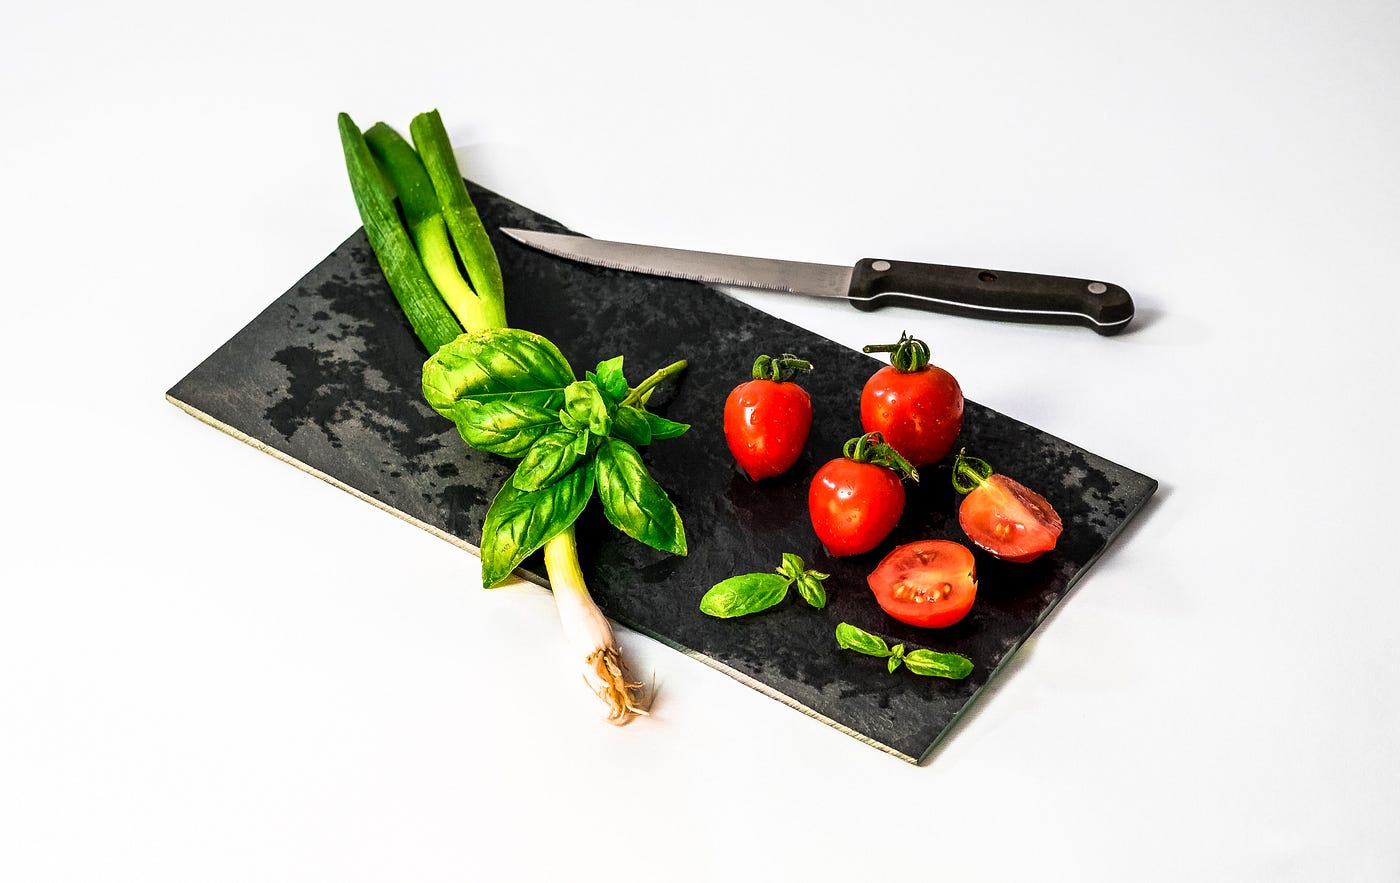 A black cutting board with a nice to the side of it. There are a few tomatos (one cut in half) and some leafy greens on the board. There are different types of plant-based diets, ranging from vegan diets, which exclude all animal products, to vegetarian diets, which may include some animal products, such as dairy and eggs.